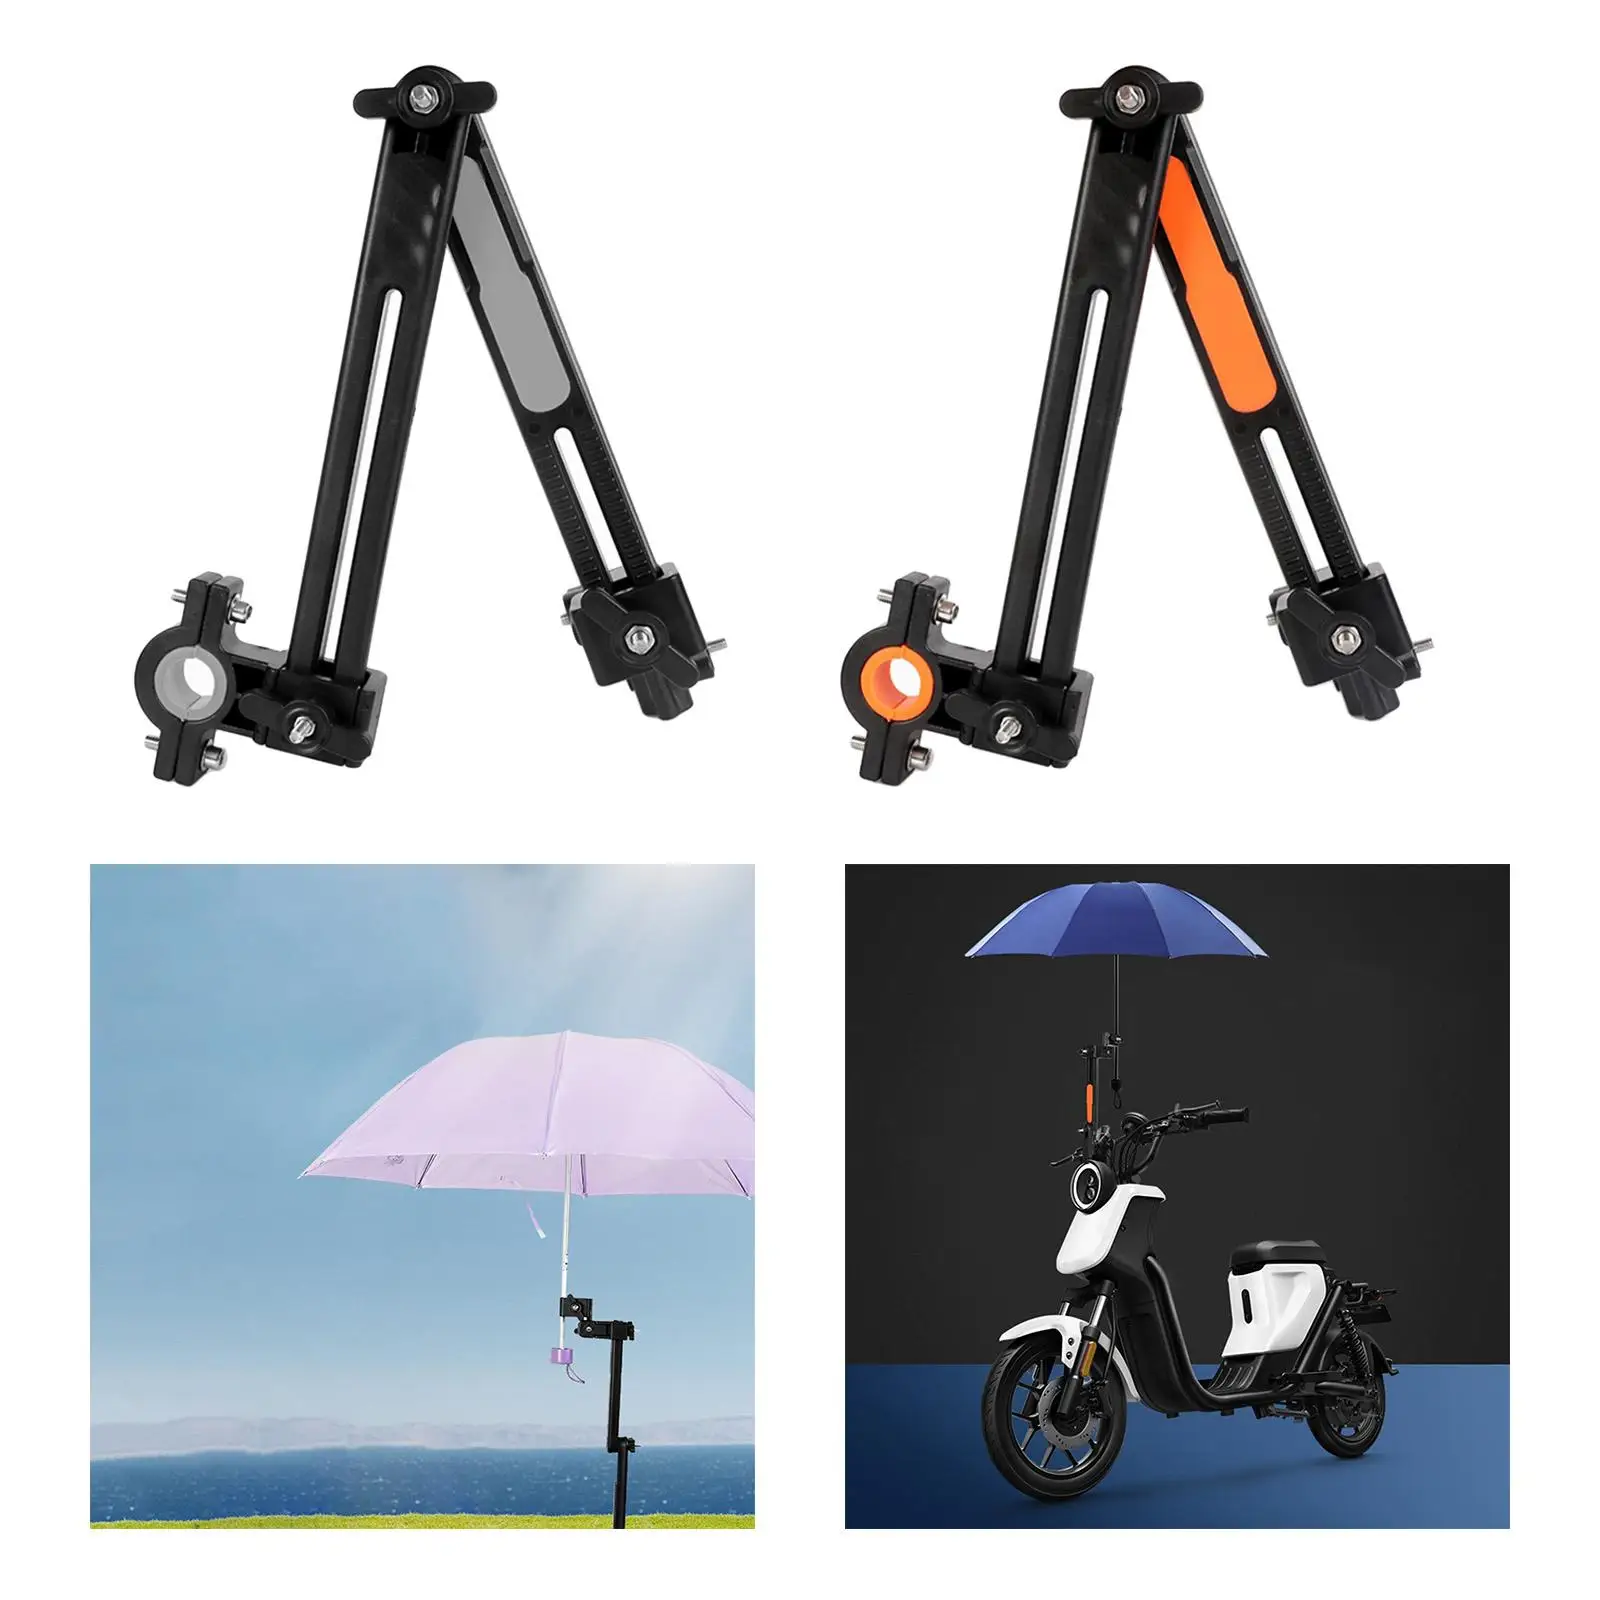 Universal Bicycle Umbrella Stand Foldable Mount Stand Umbrella Holder for Golf Chair